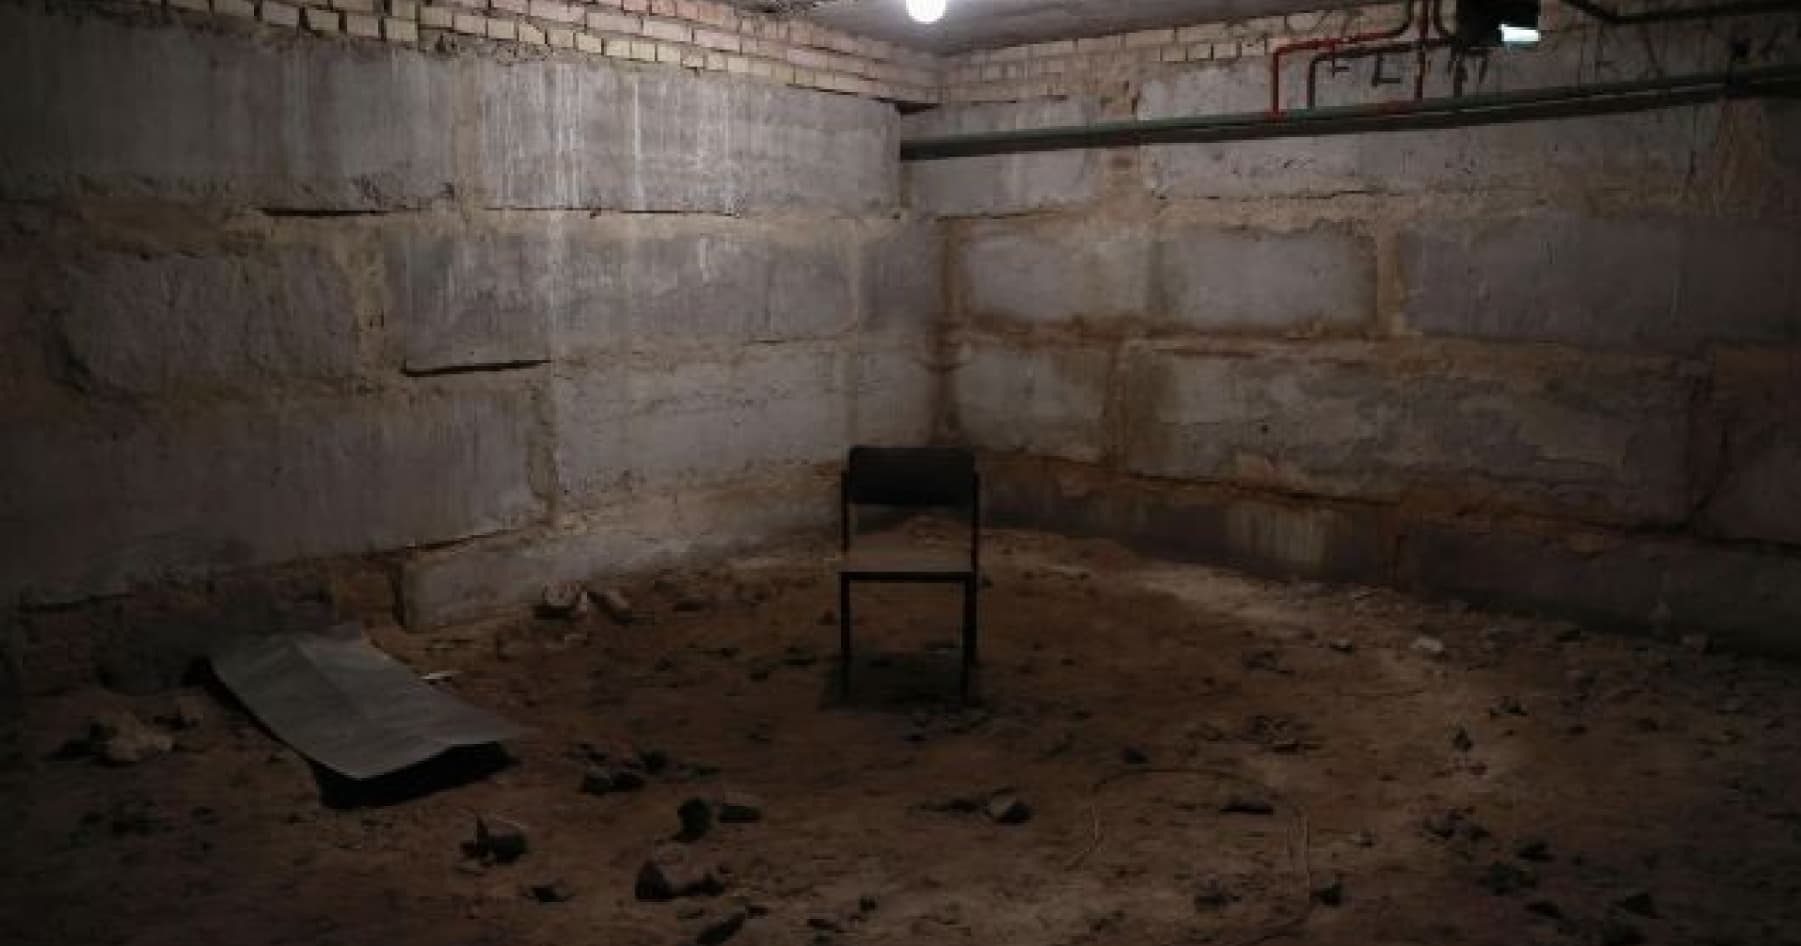 Another torture chamber of Russian soldiers was discovered in the Kharkiv region